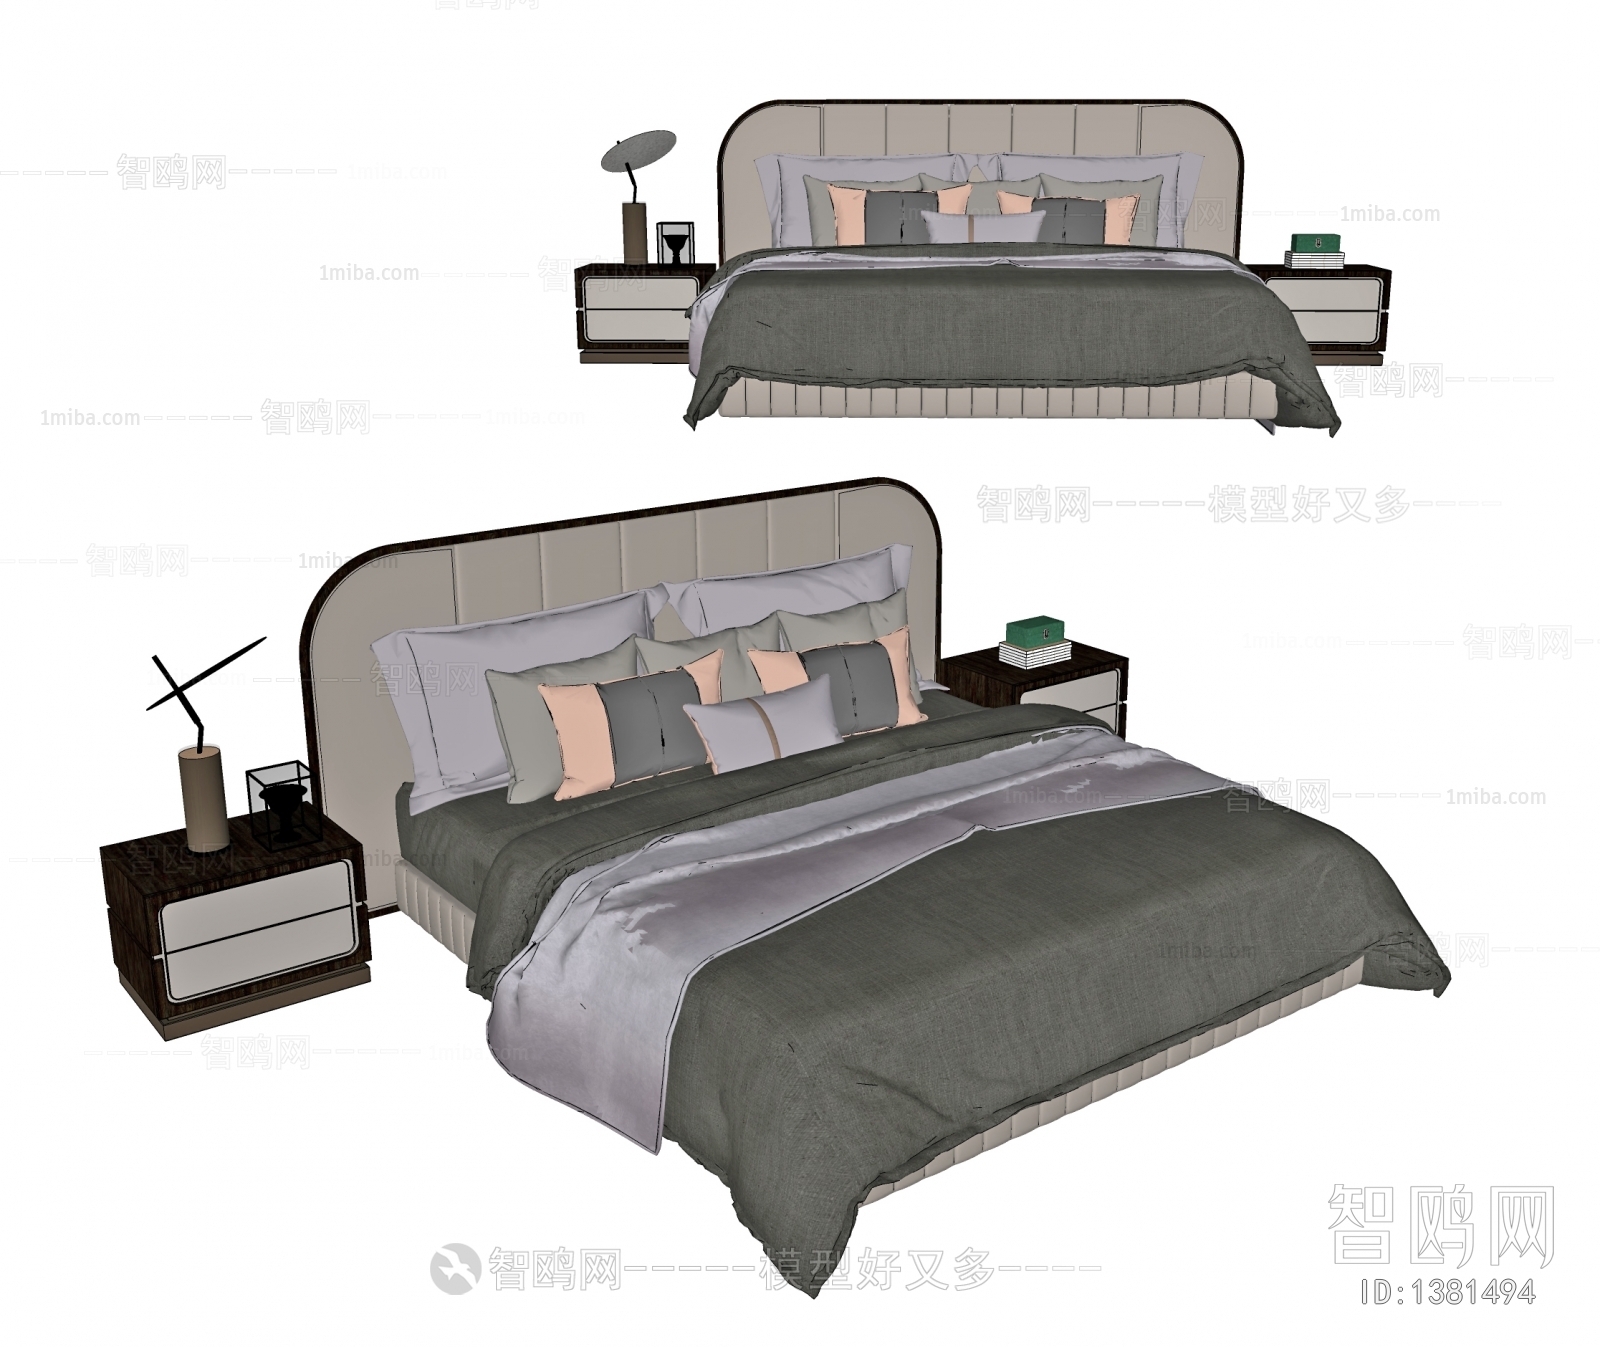 New Chinese Style Double Bed